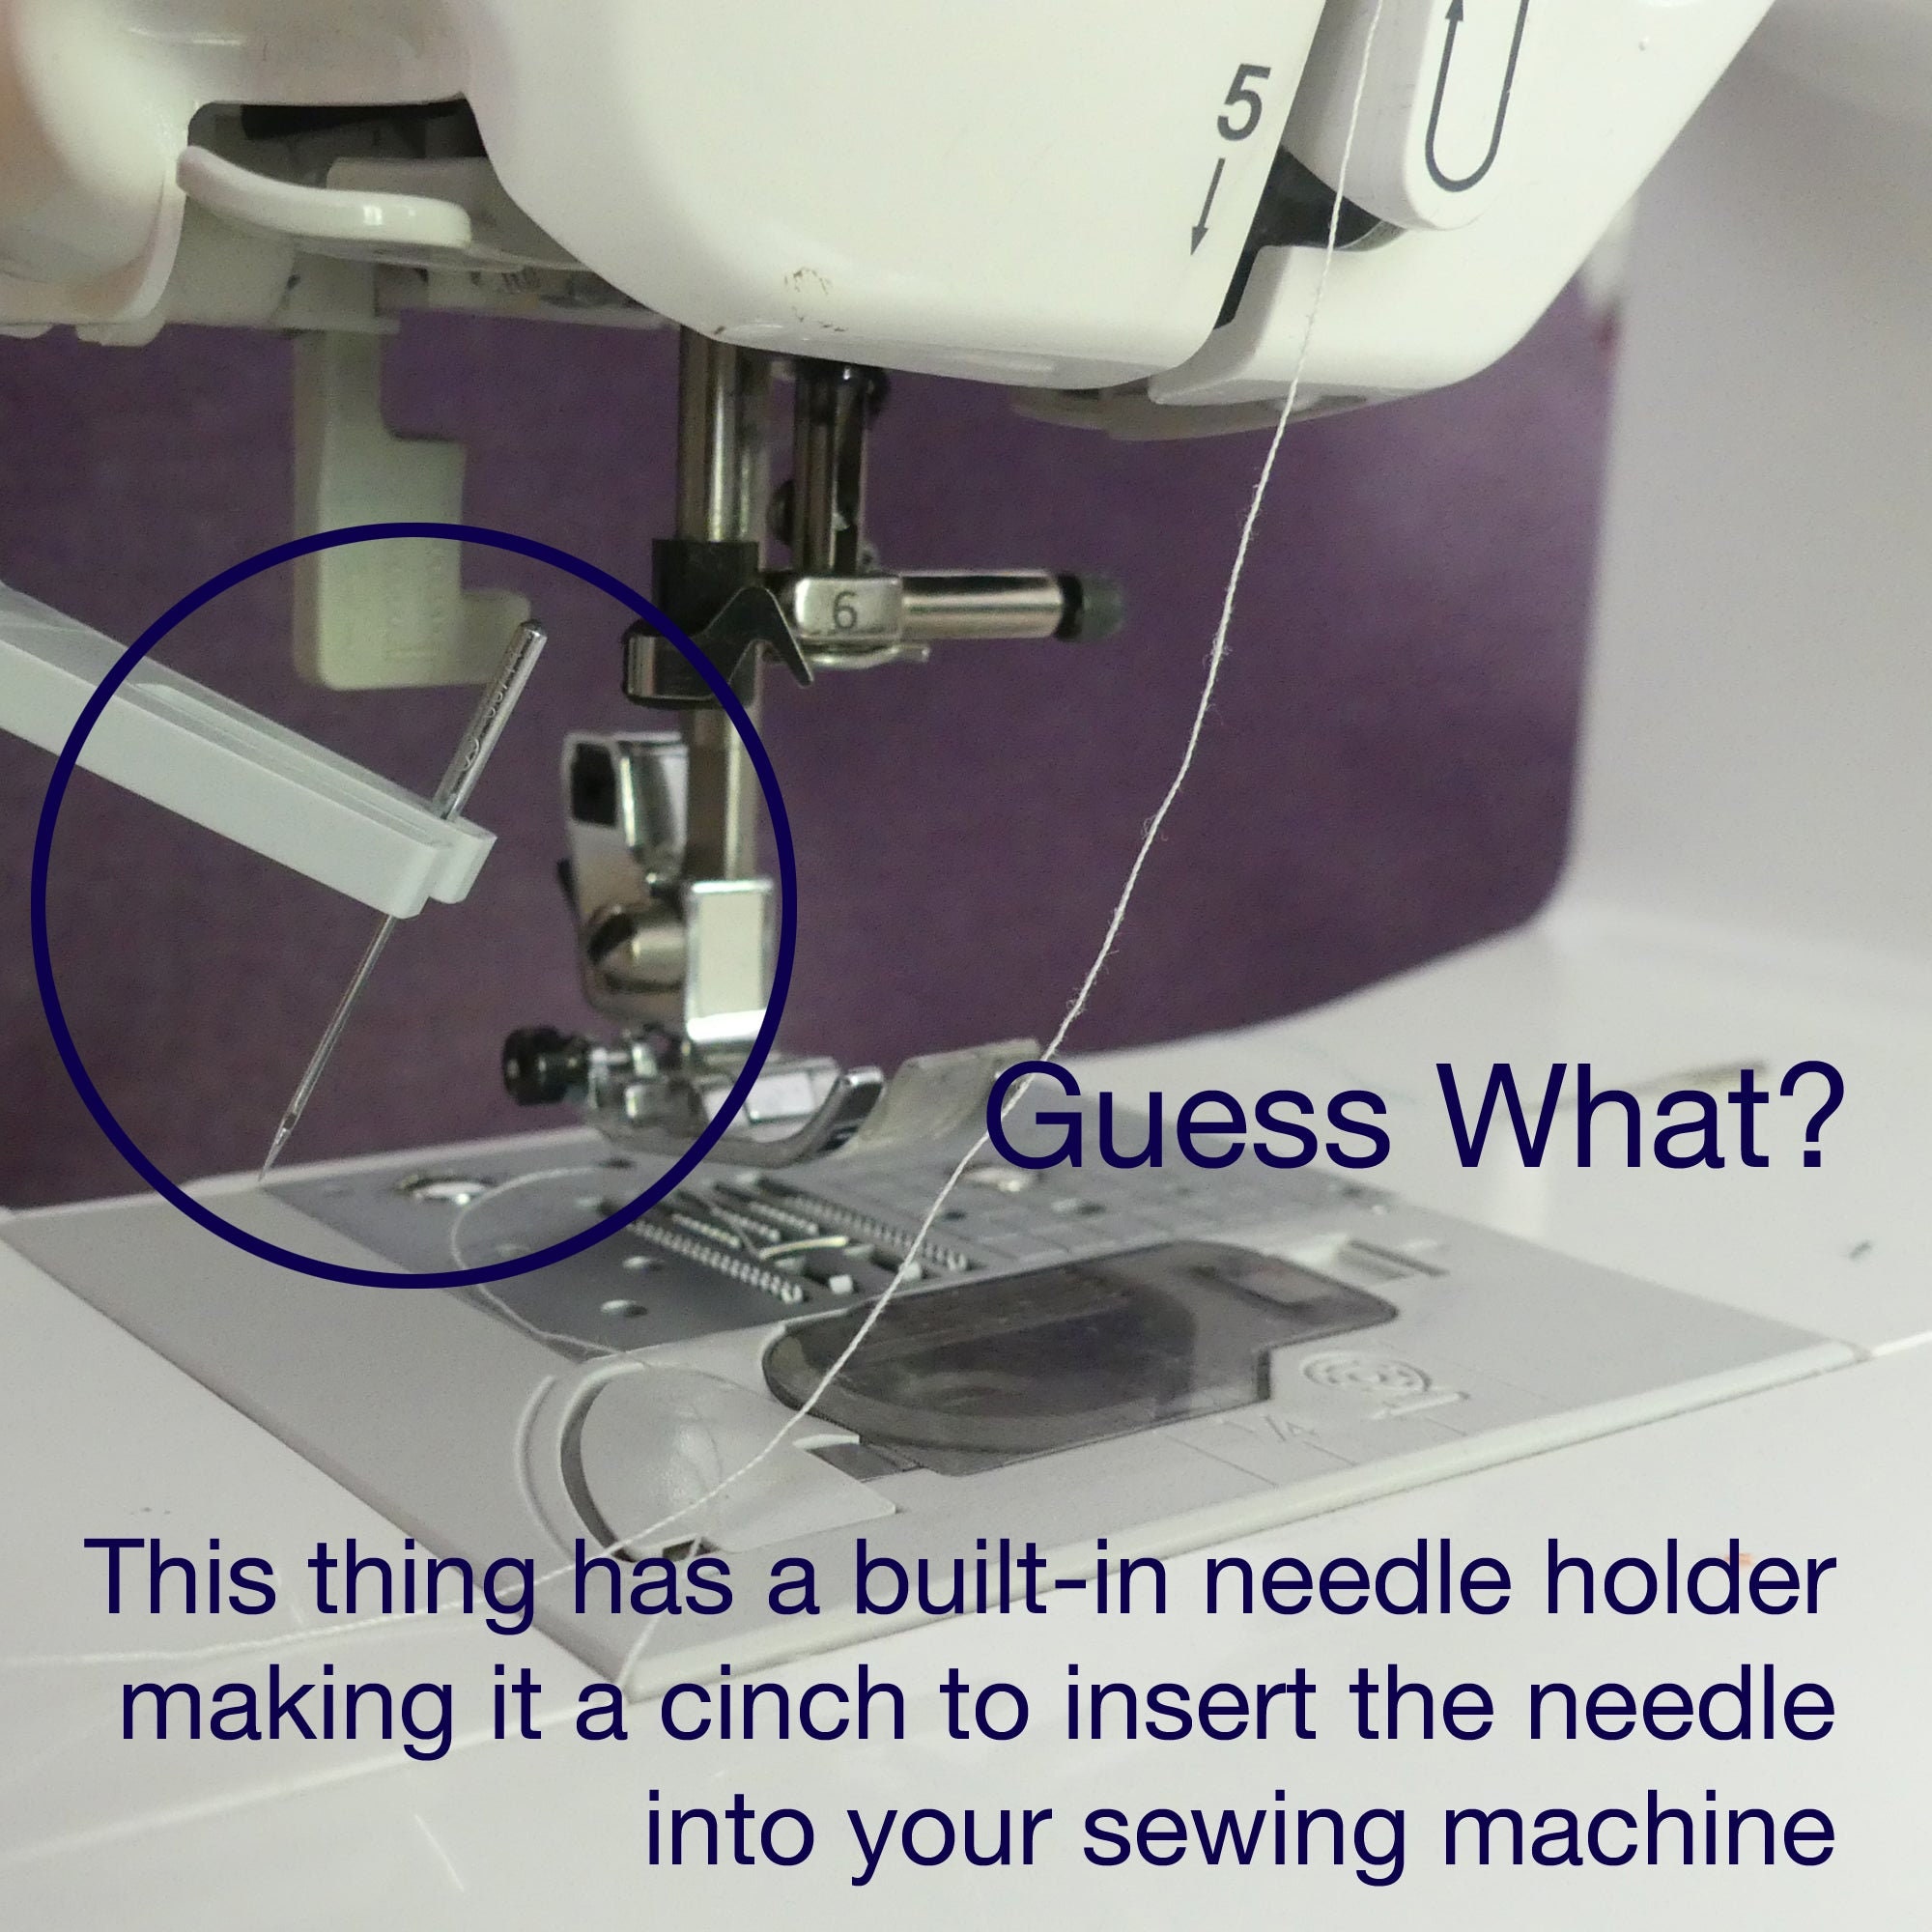 Bulky Seam Jumper - Get Consistent Stitches When Sewing Over Seams & Bumps